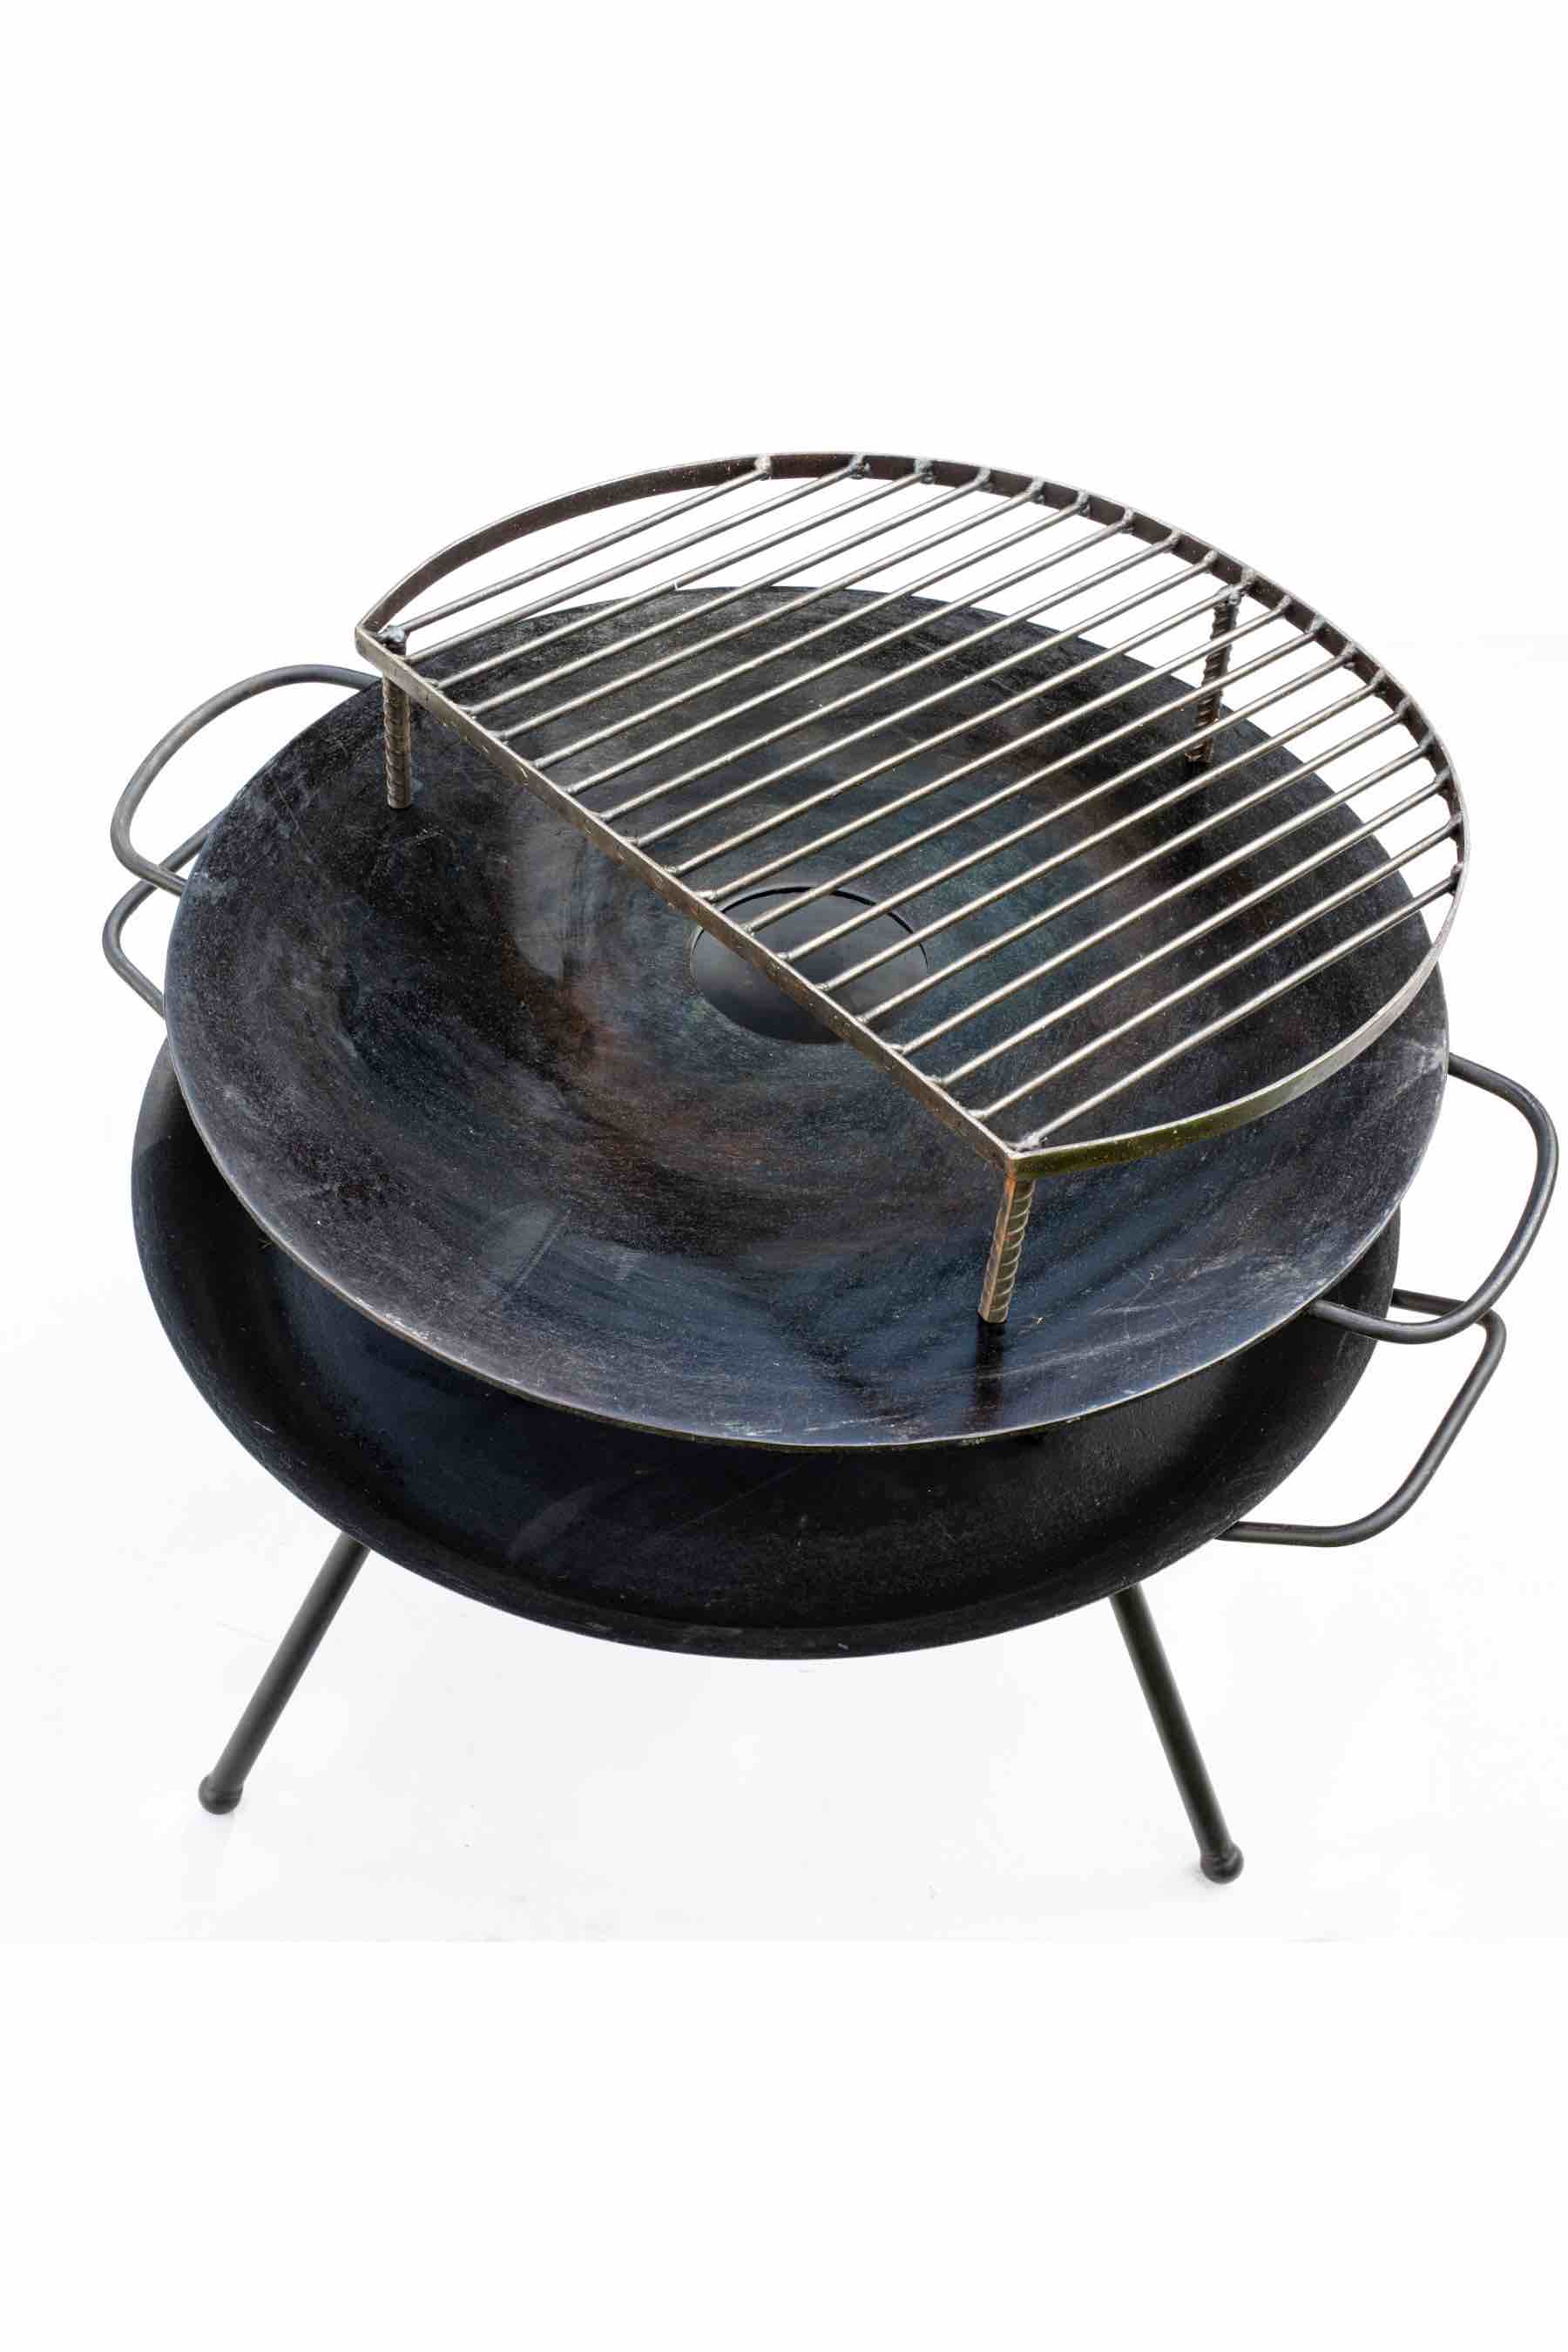 vargas-brothers-fire-pits-arado-grill-for-fire-pits